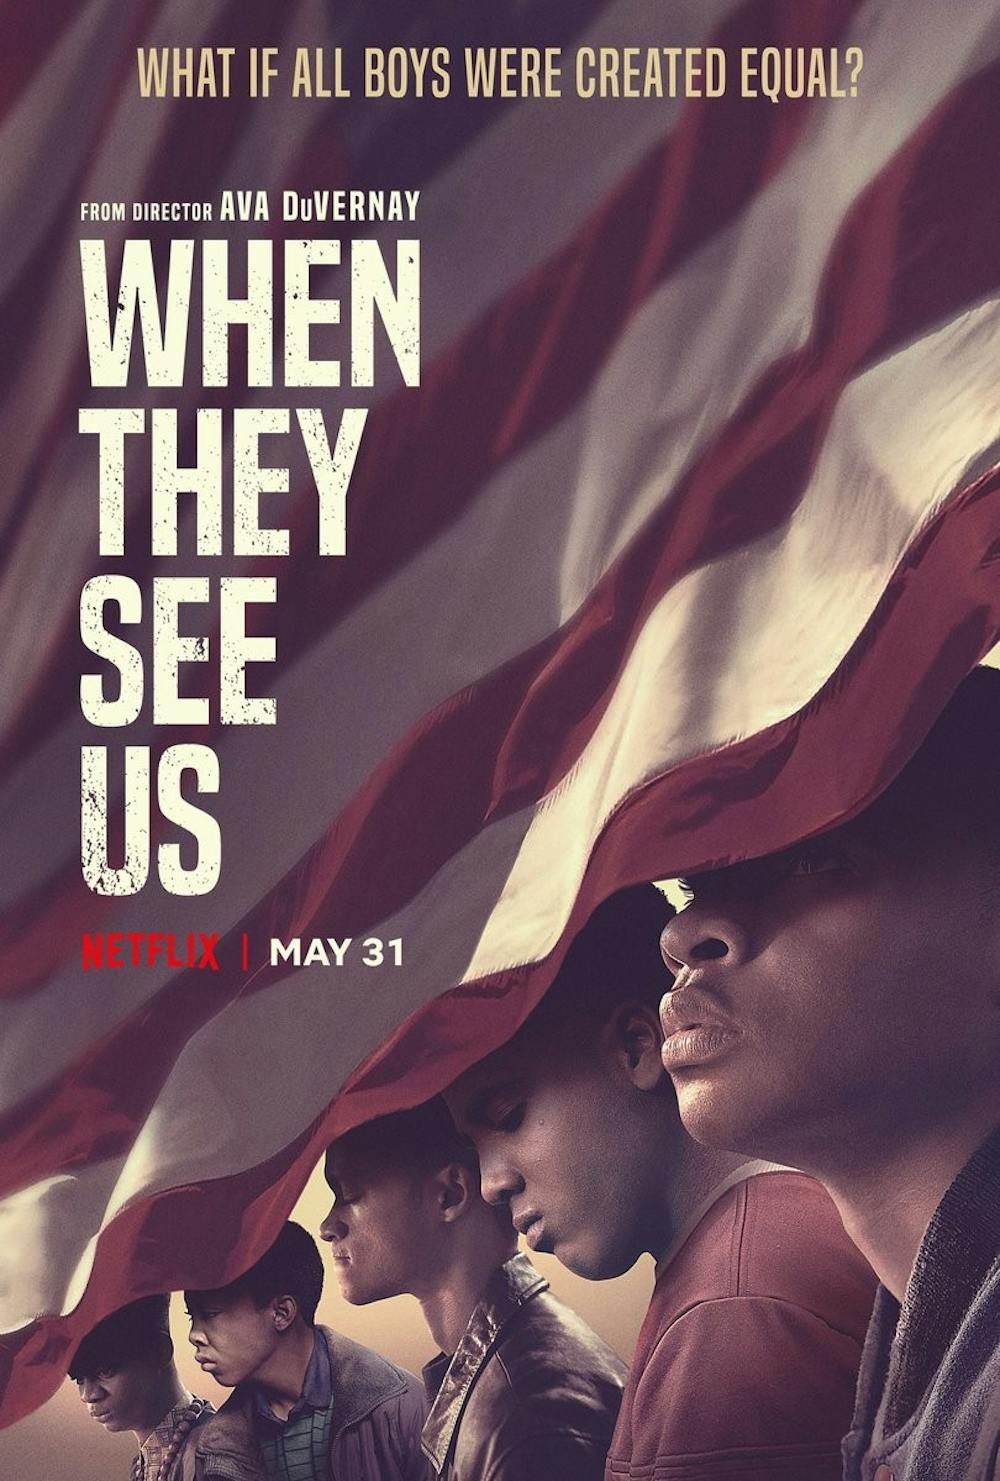 when-they-see-us-poster